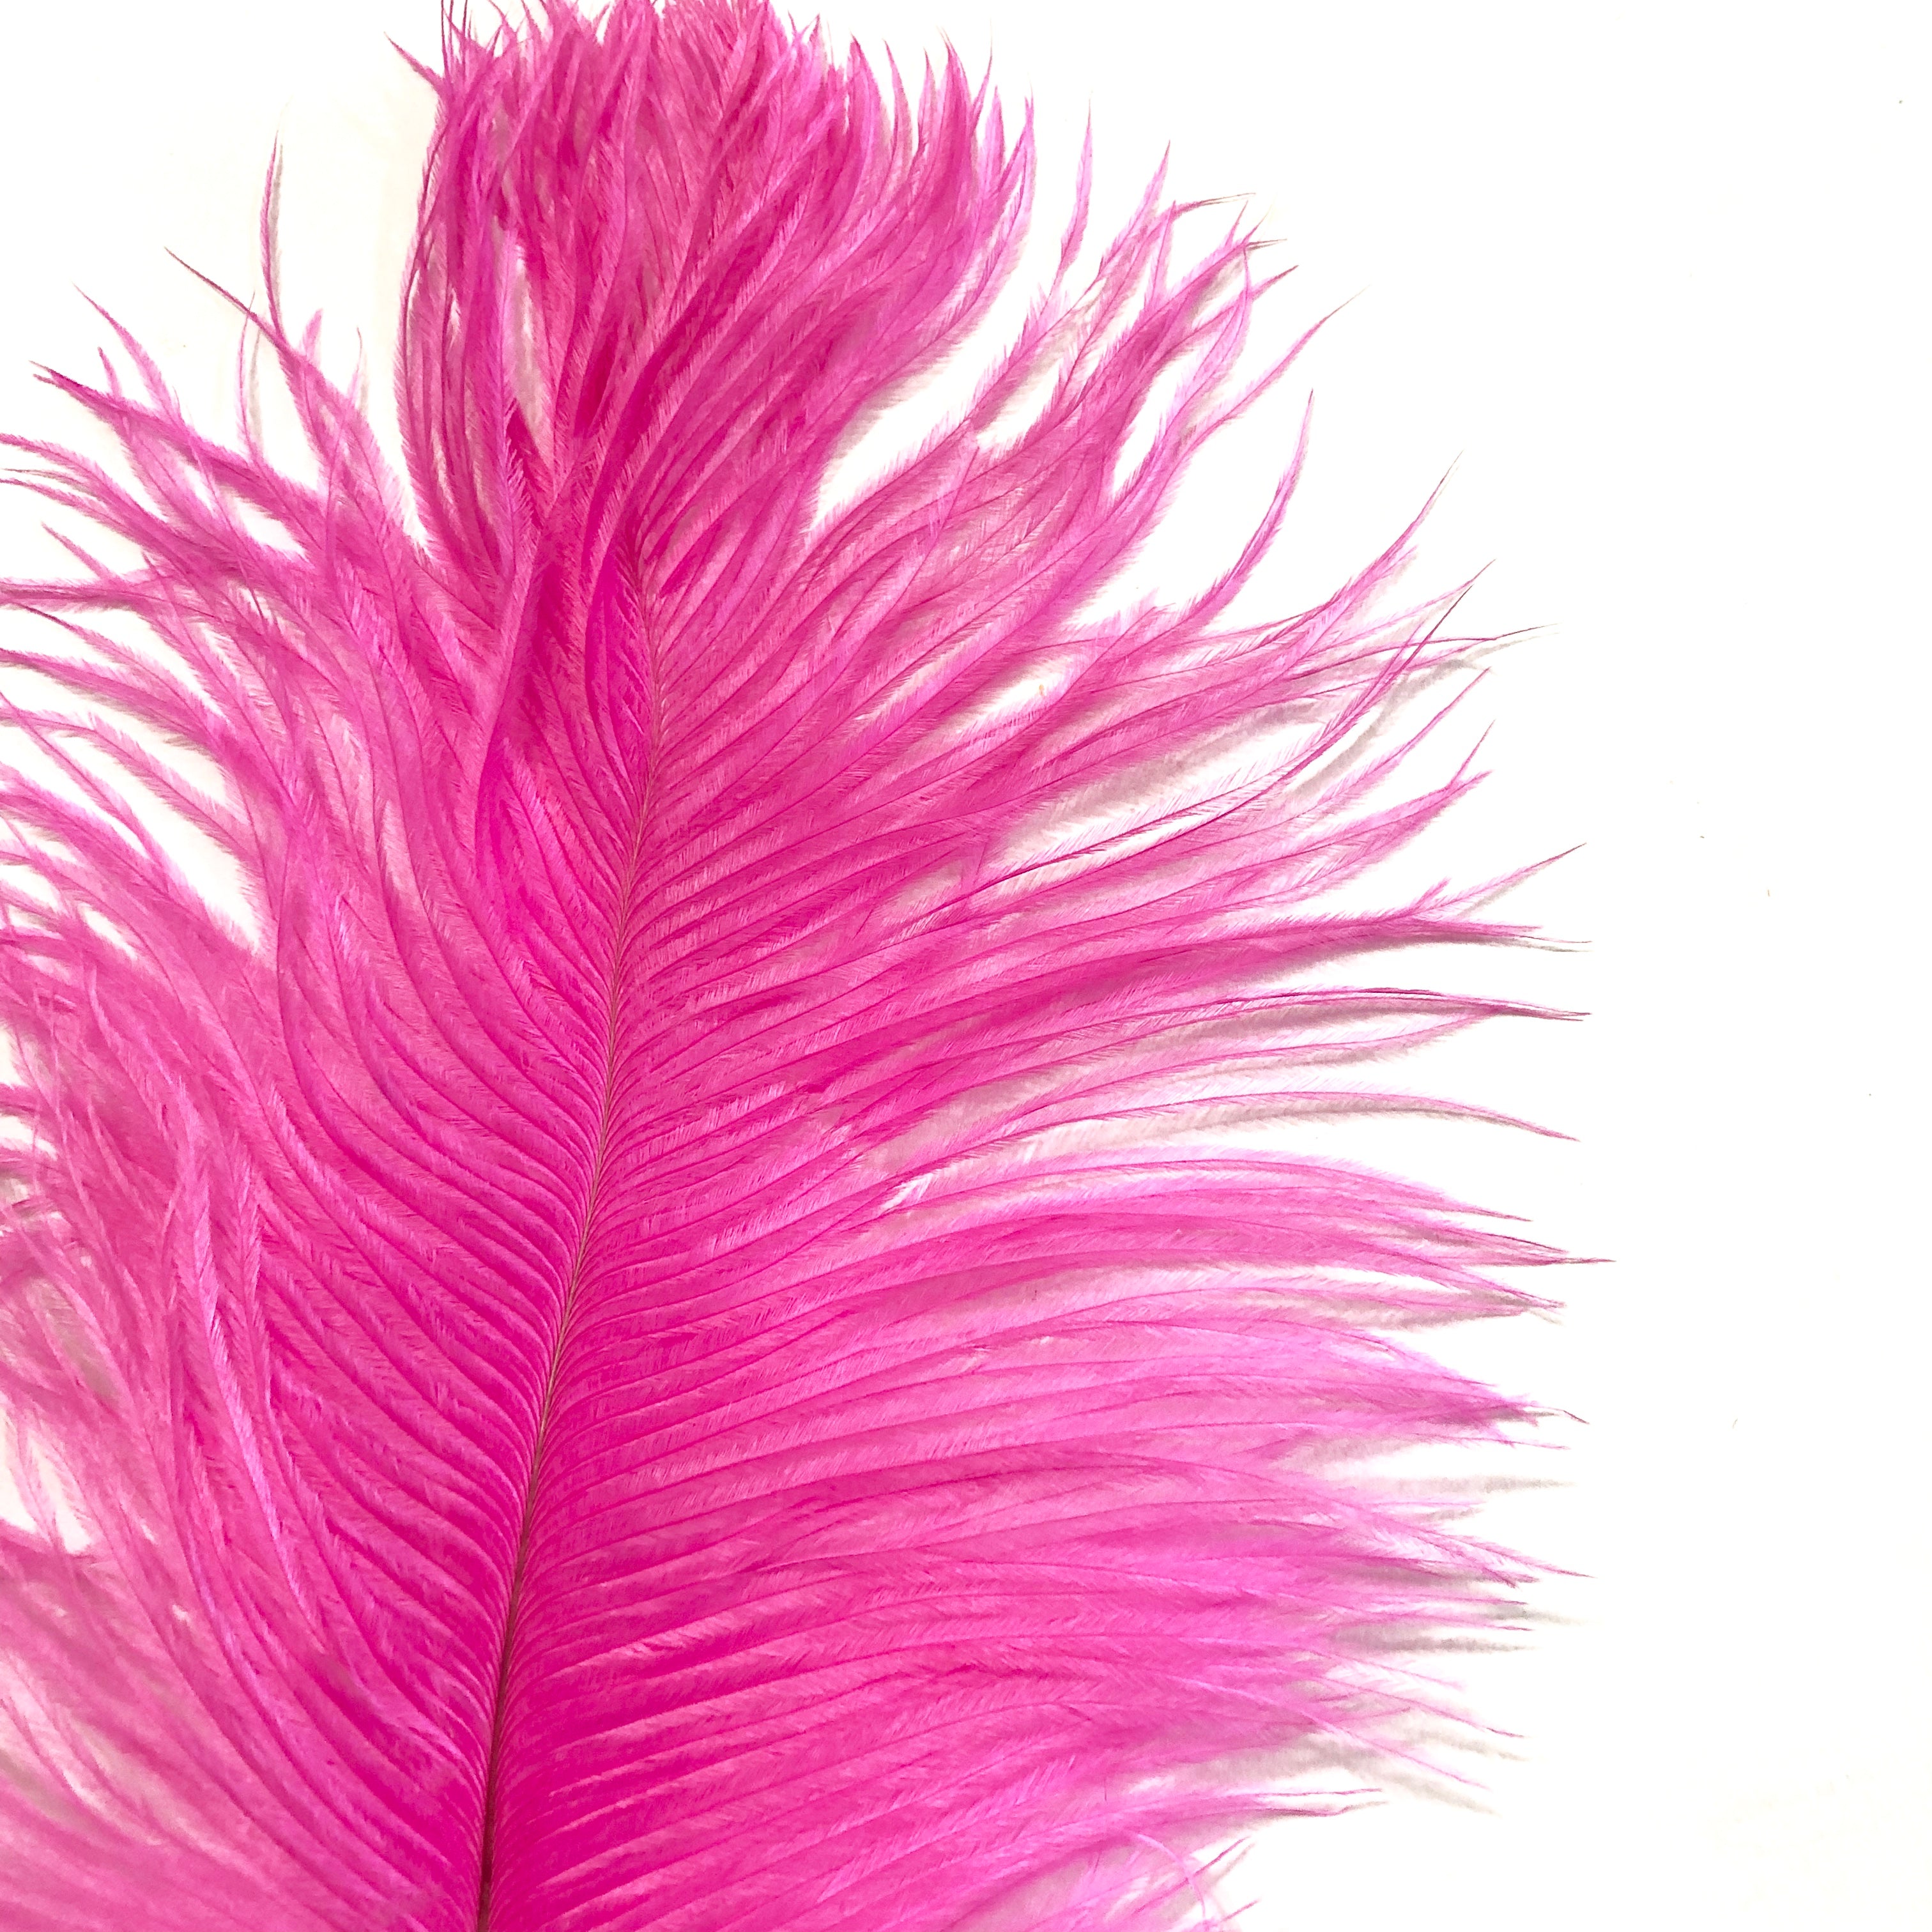 Ostrich Feather Drab 37-42cm - Hot Pink